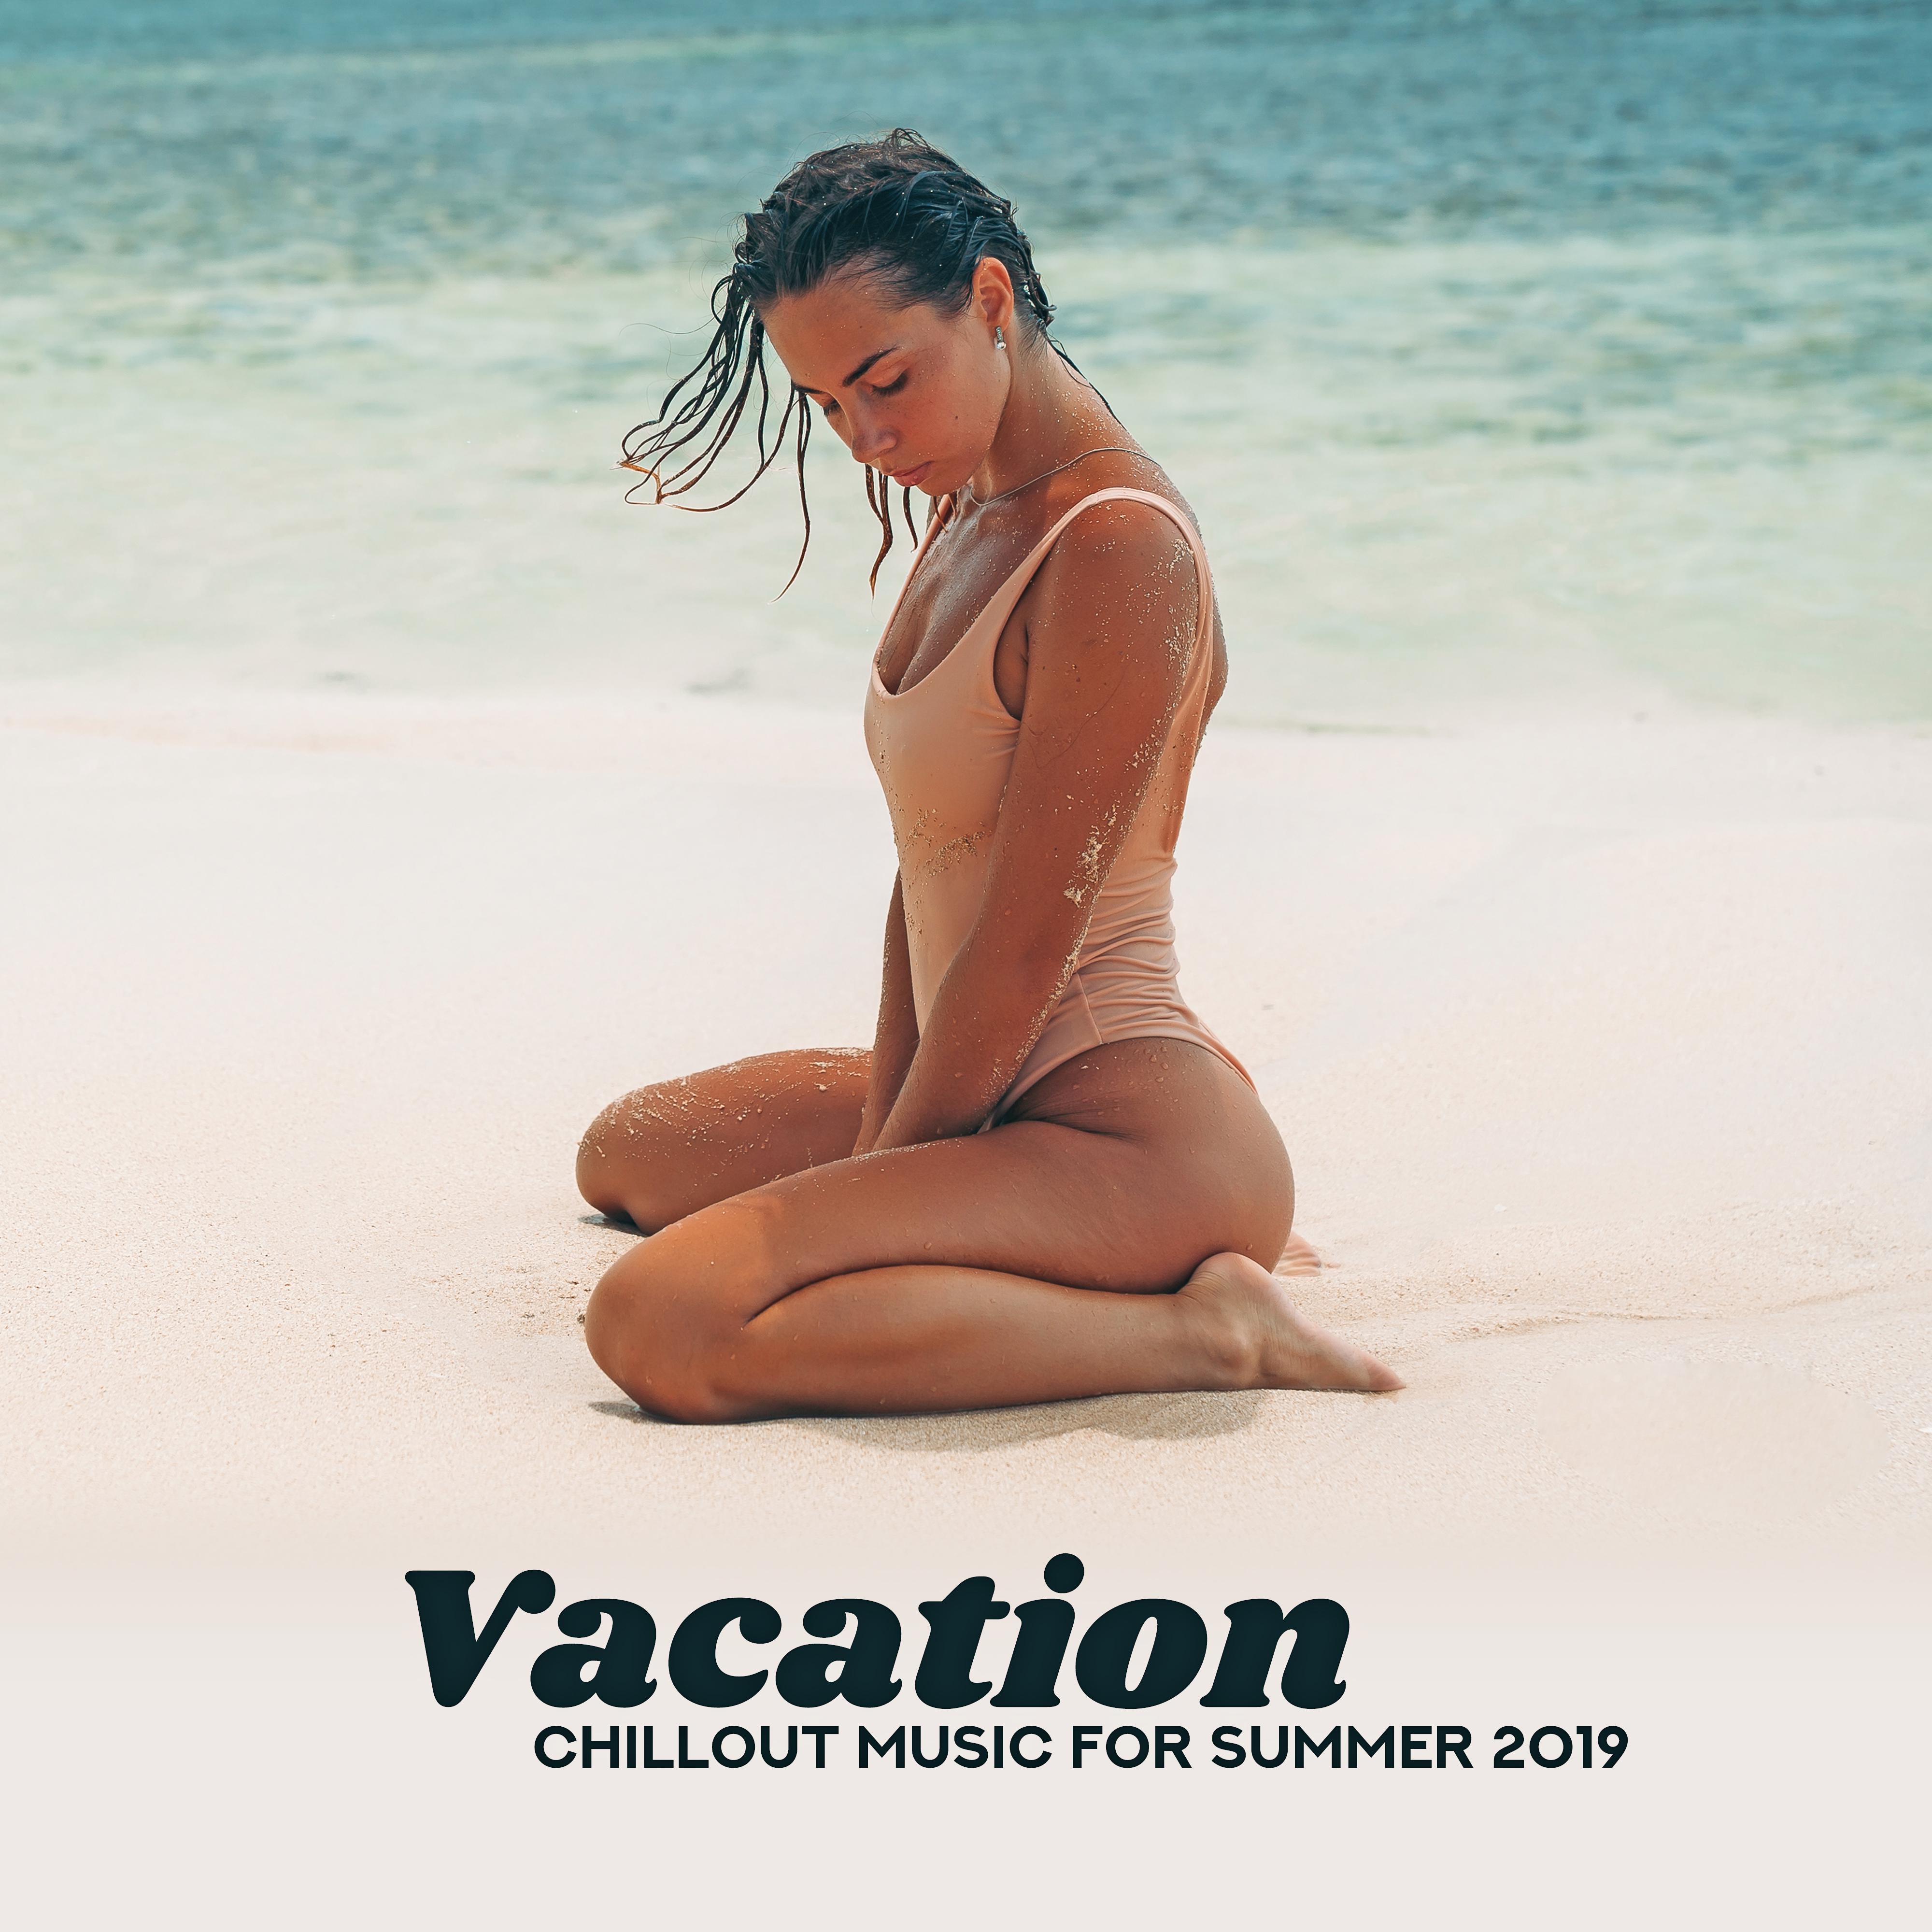 Vacation Chillout Music for Summer 2019